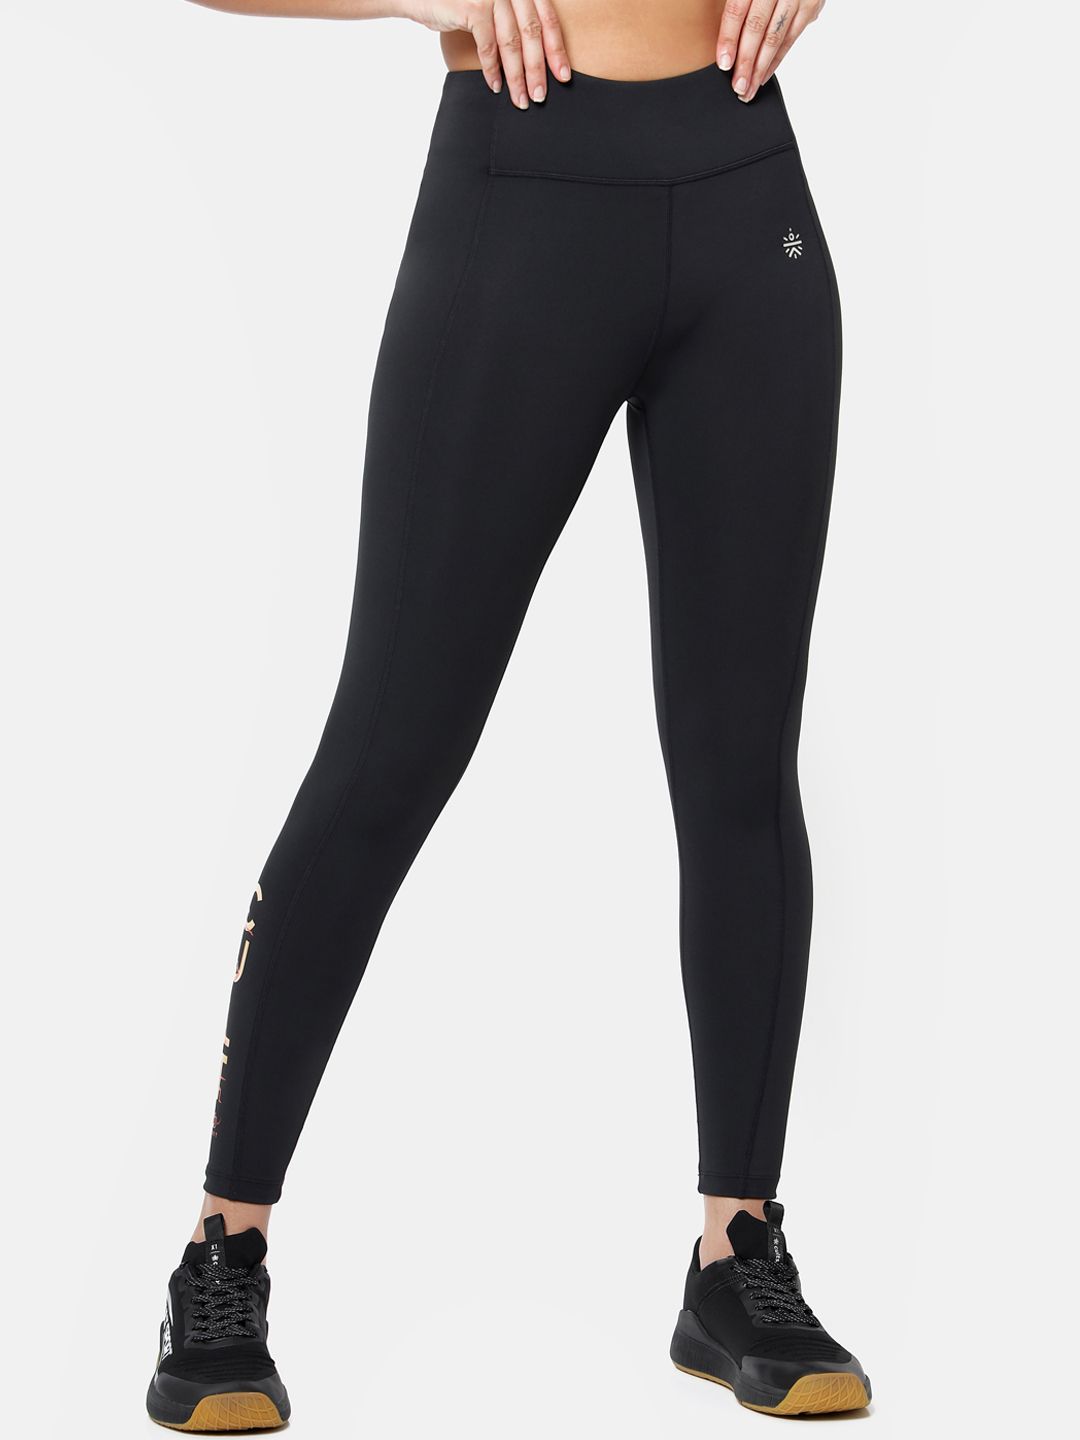 Cultsport Women Black Solid Moisture Wicking Tights Price in India